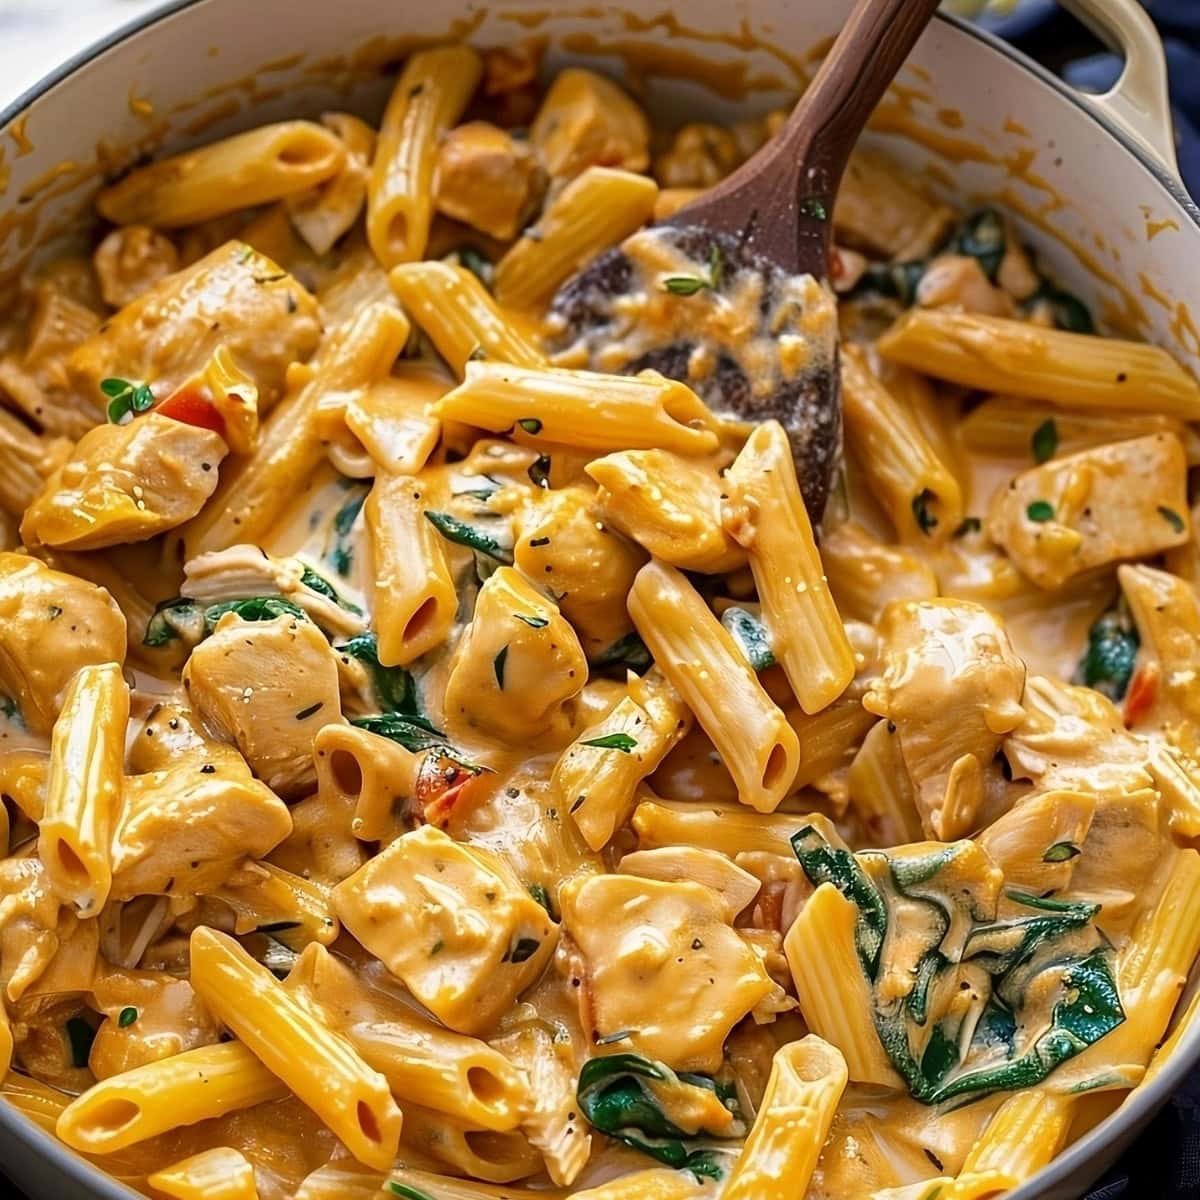 Tuscan chicken pasta in skillet tossed with a wooden ladle.